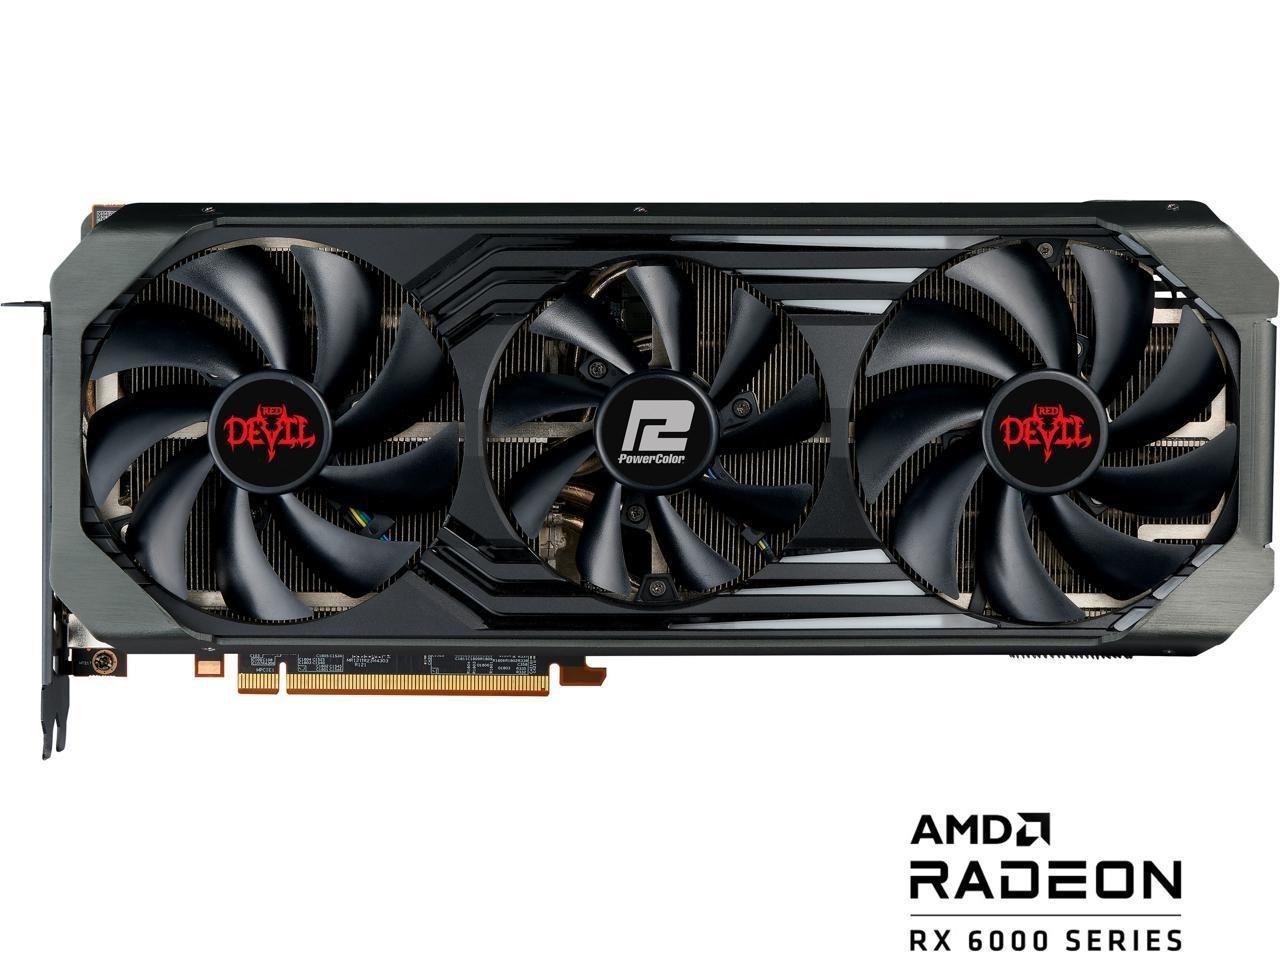 PowerColor Red Devil Amd Radeon RX 6900 XT Ultimate Gaming Graphics Card With 16GB GDDR6 Memory